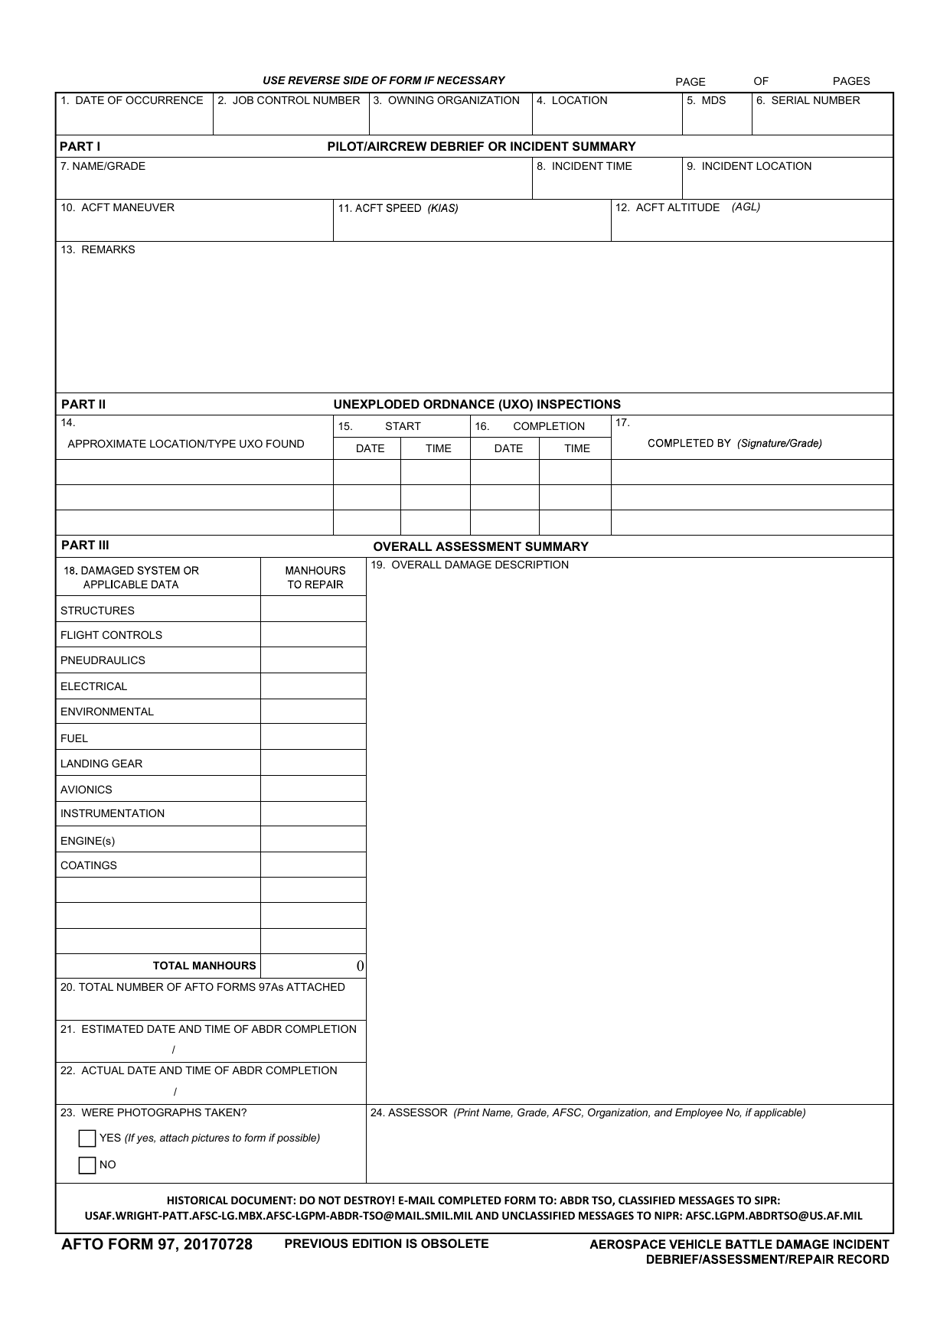 AFTO Form 97 Aerospace Vehicle Battle Damage Incident Debrief / Assessment / Repair Record, Page 1